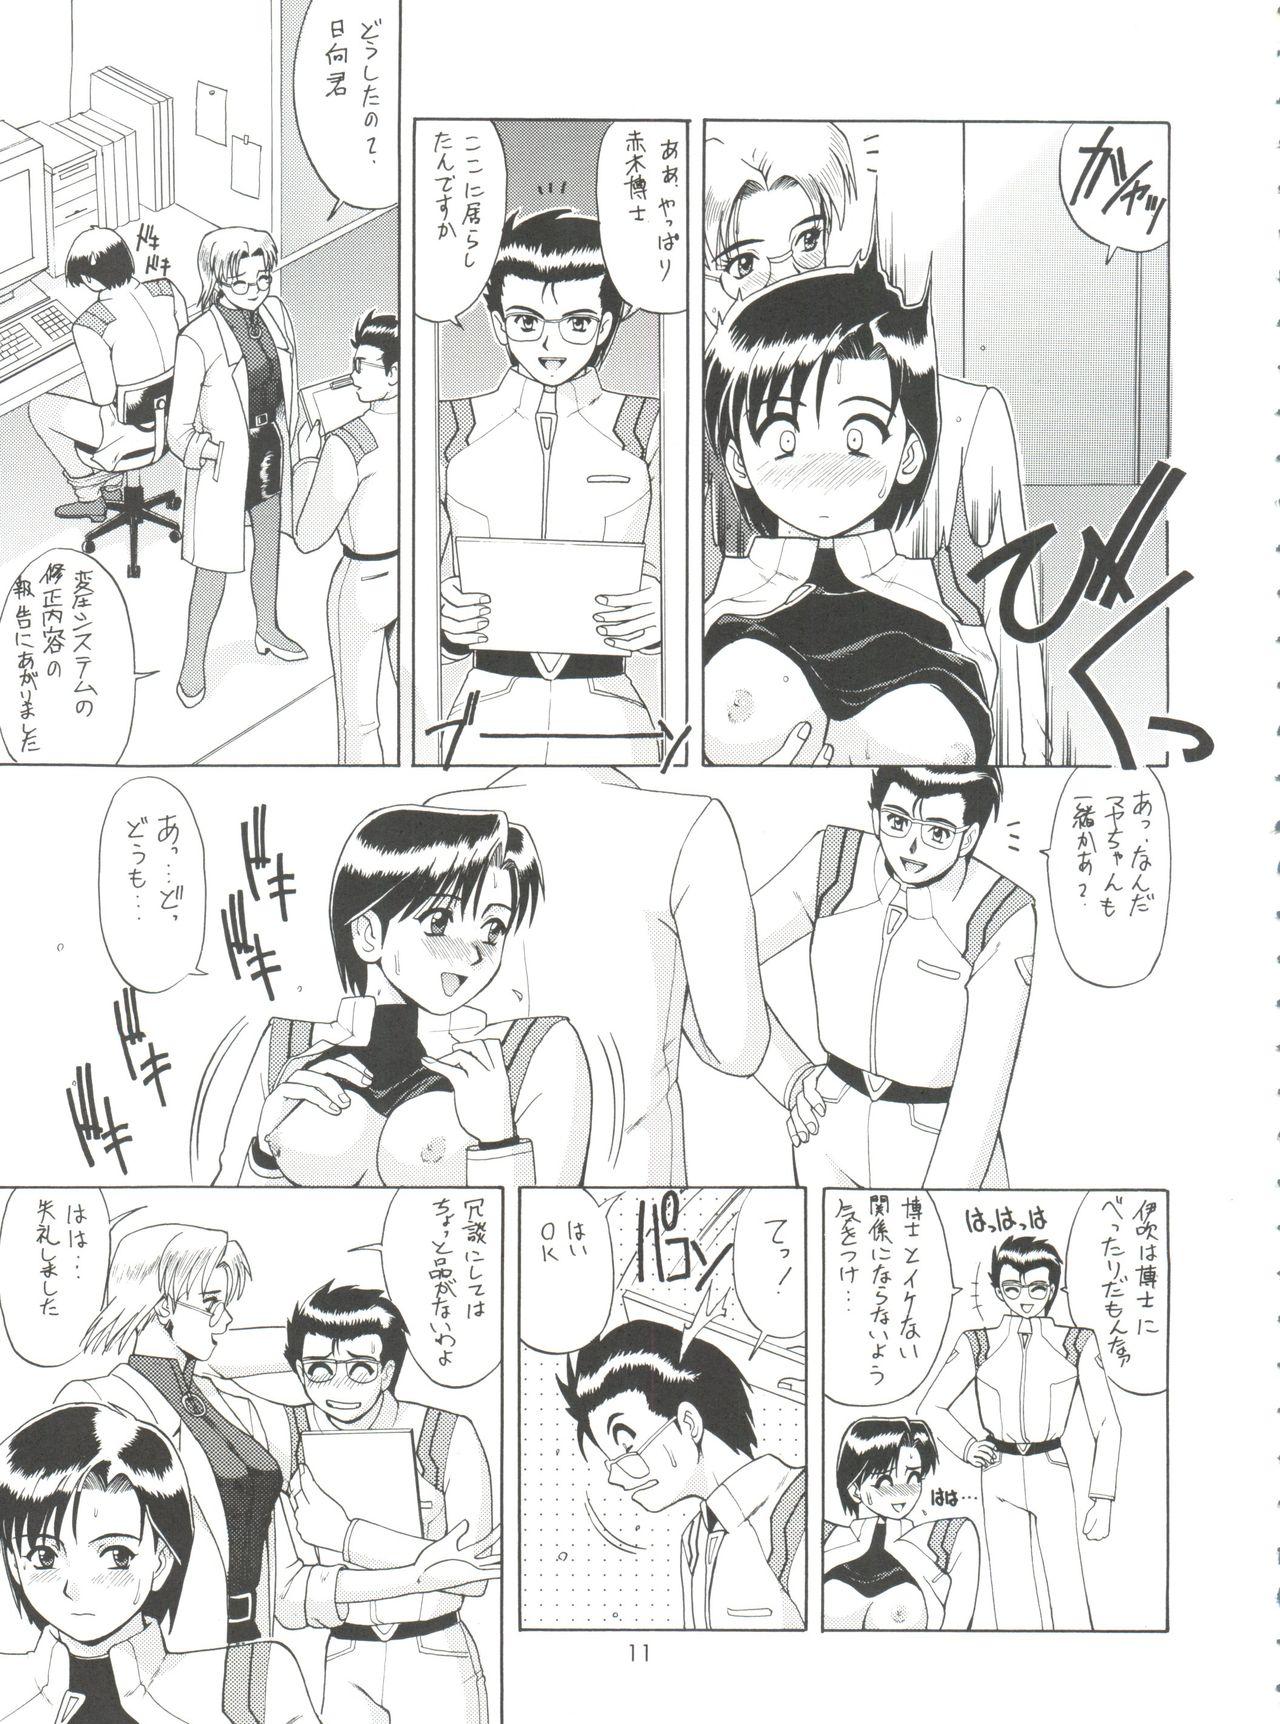 Staxxx Suite For My Sweet Shinteiban - Neon genesis evangelion Dick - Page 10